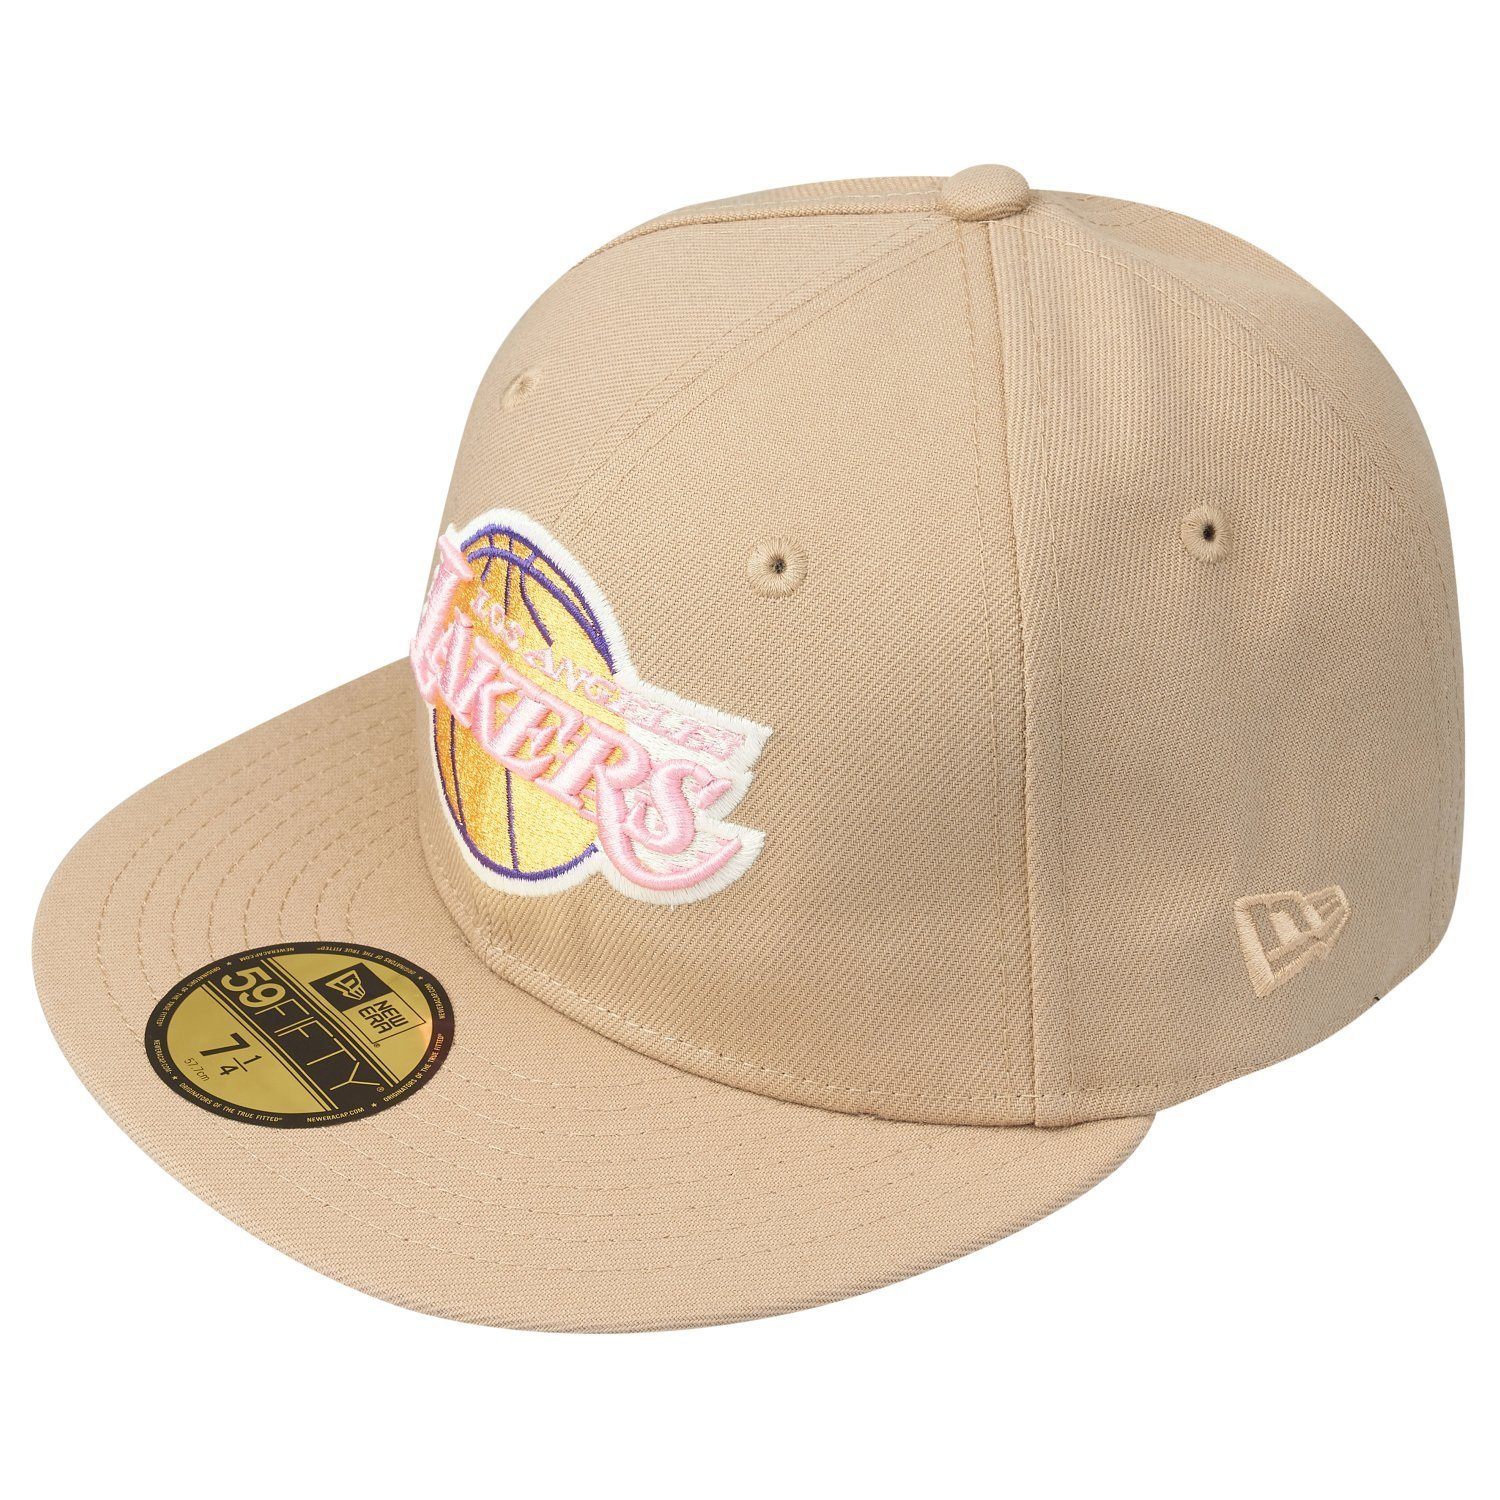 Fitted 59Fifty Cap New Lakers Era Los Angeles